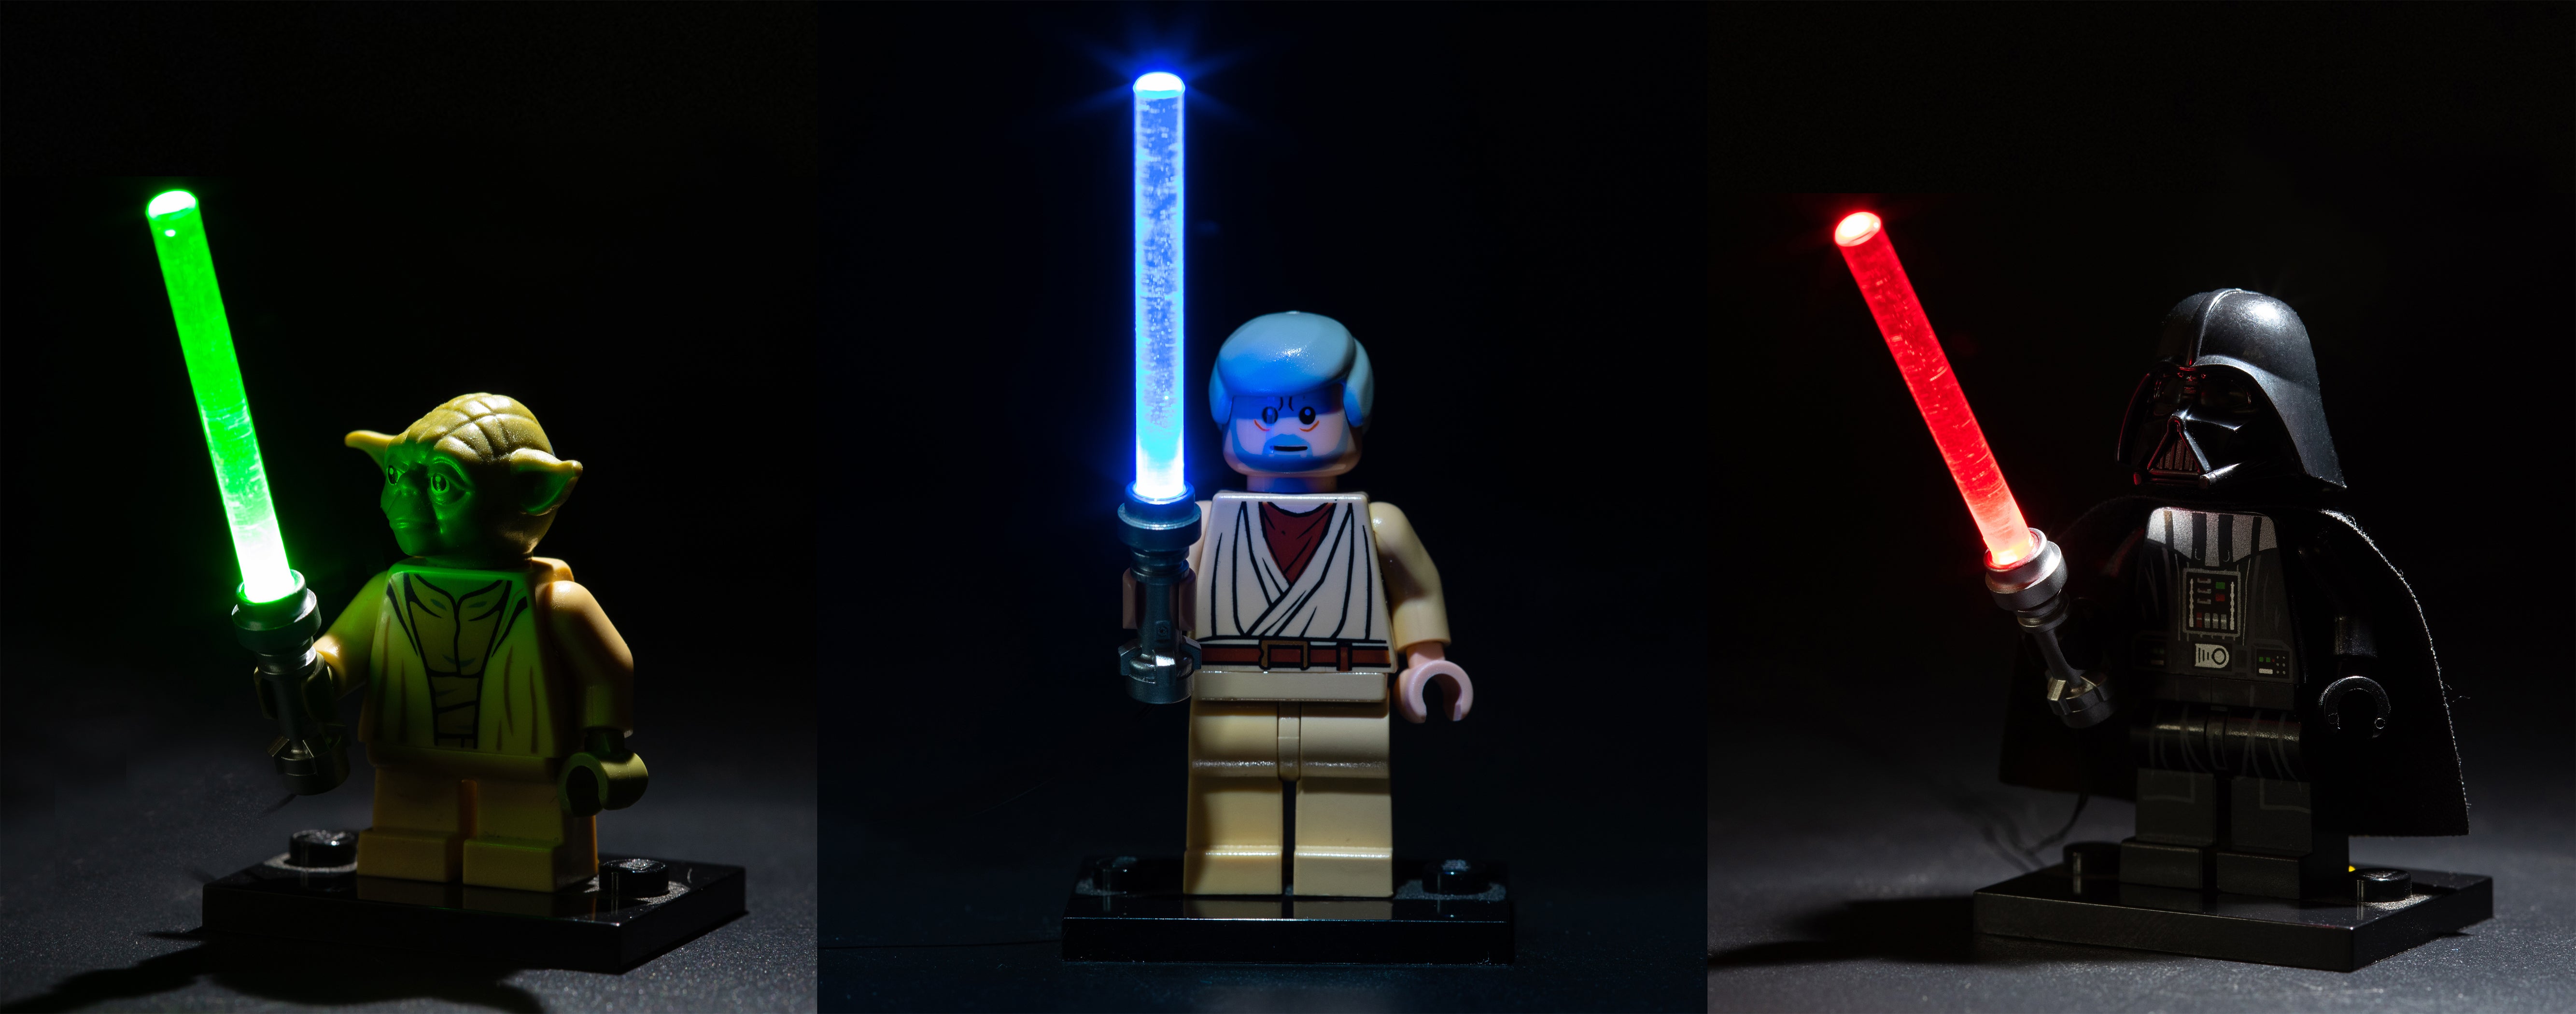 LED Lightsaber: Red, Blue and Green - LIGHT LINX - works with LEGO bricks -  by Brick Loot